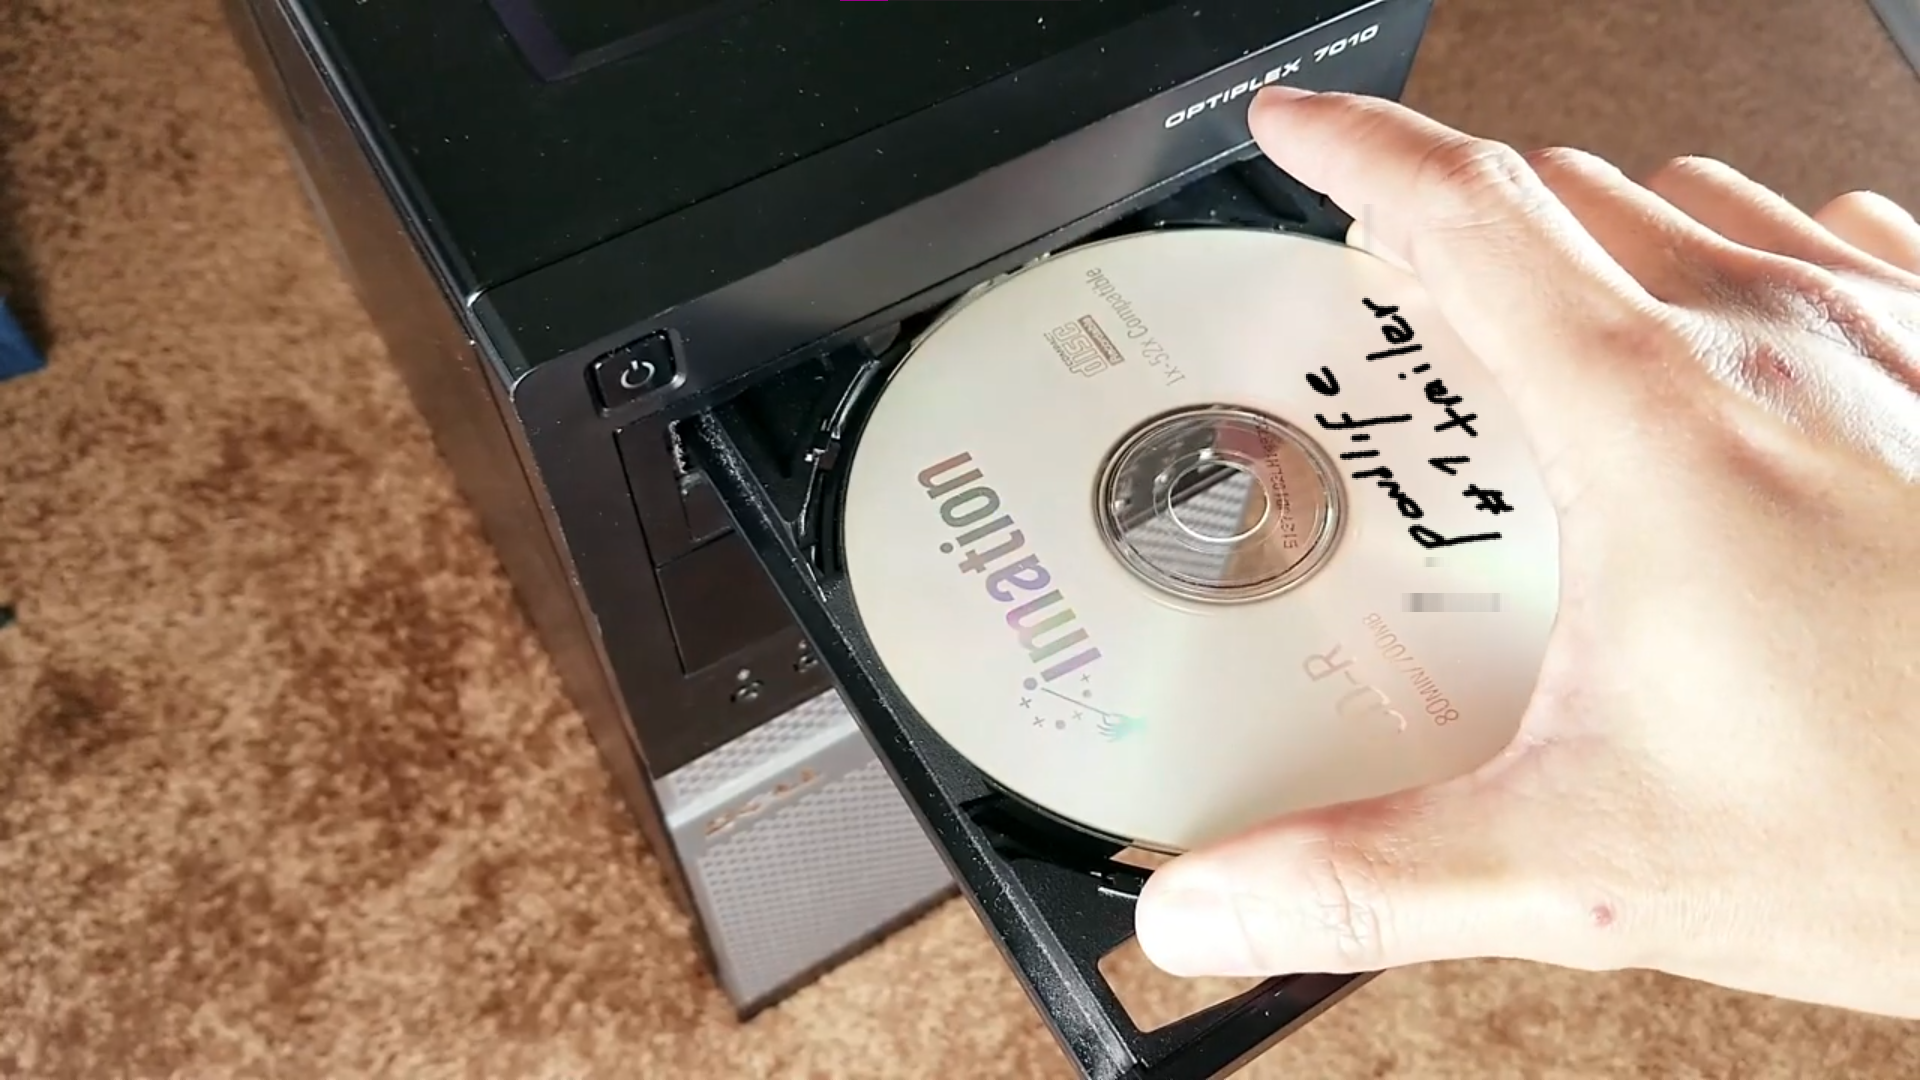 a thumbnail from the pondlife trailer showing the open cd tray of a computer tower